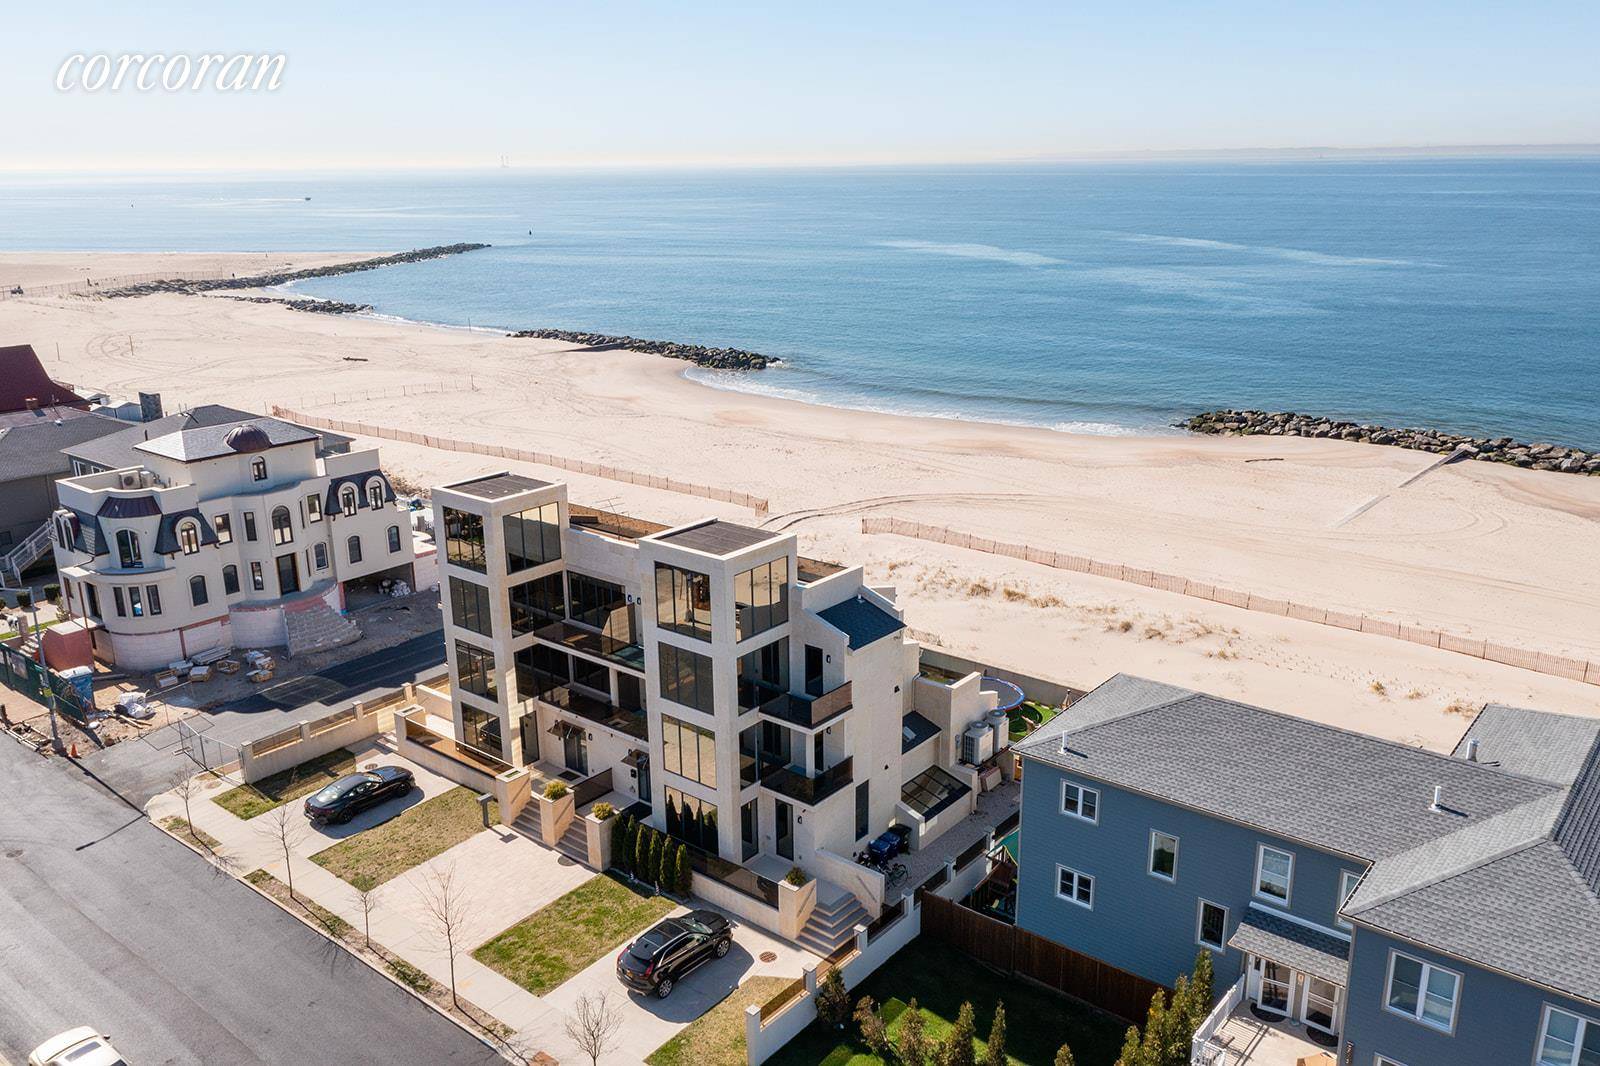 A one of a kind contemporary beachfront oasis awaits you in coveted Sea Gate, an exclusive, historic Coney Island community steps from the ocean !